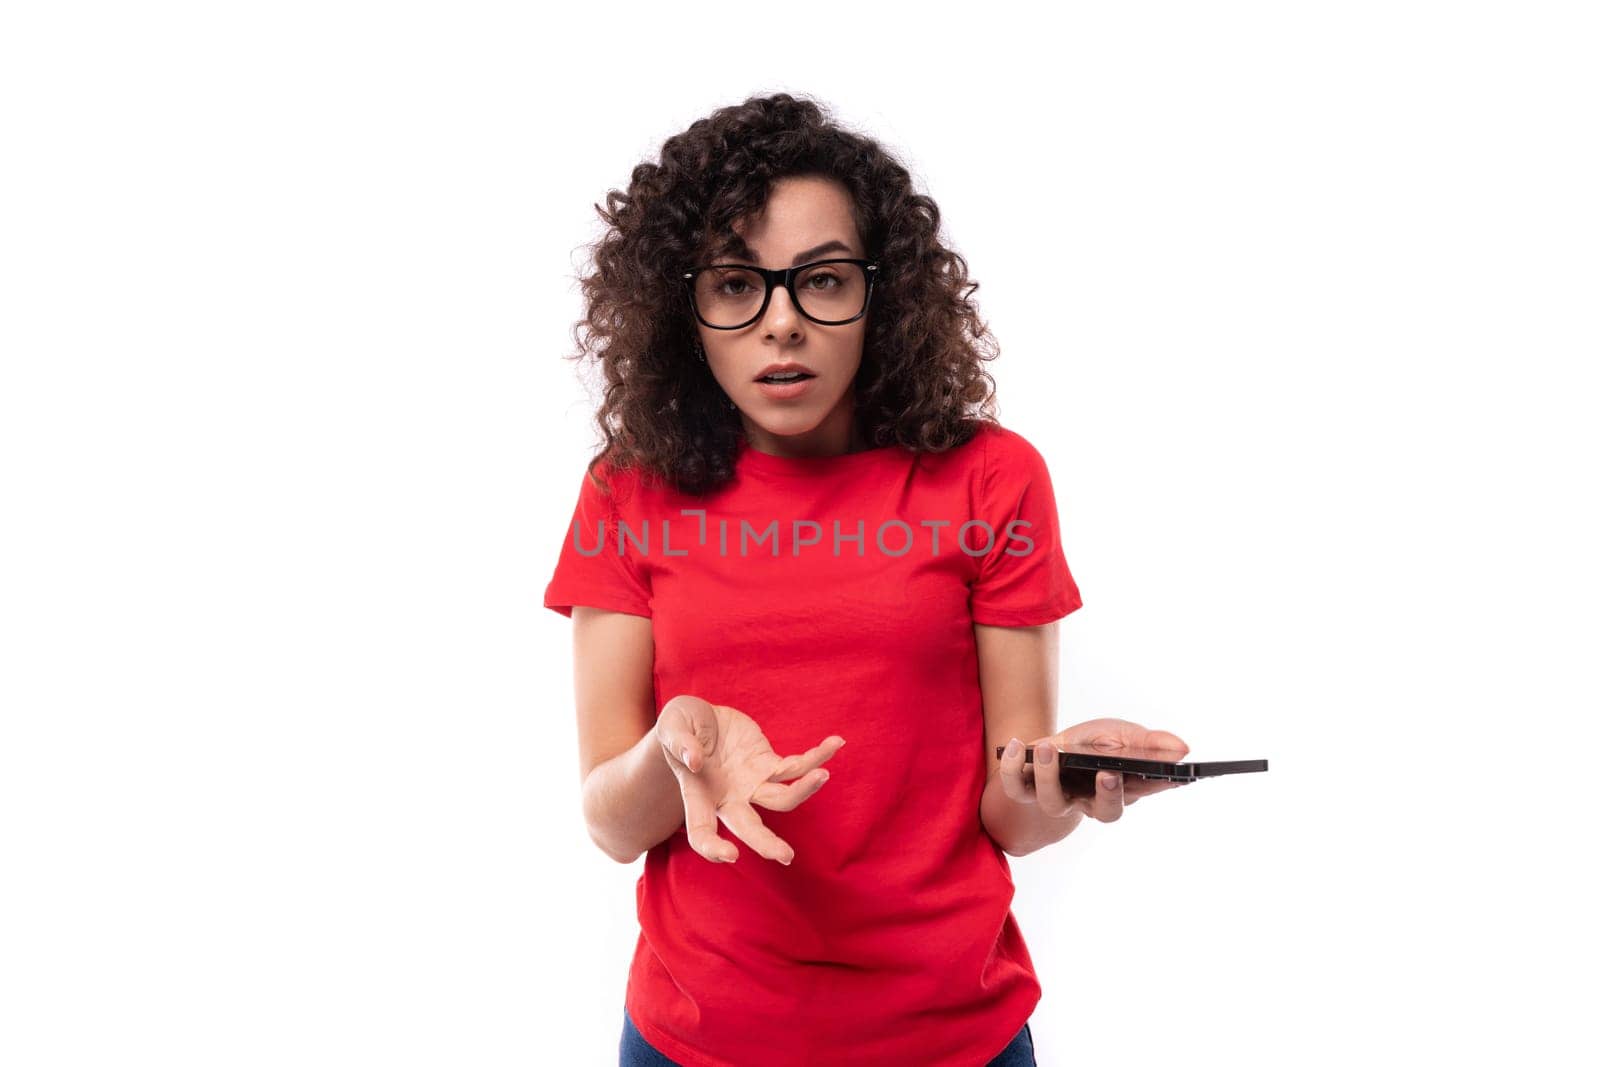 caucasian young pretty curly brunette woman in a red t-shirt spreads her arms in excitement holding a smartphone in her hand.